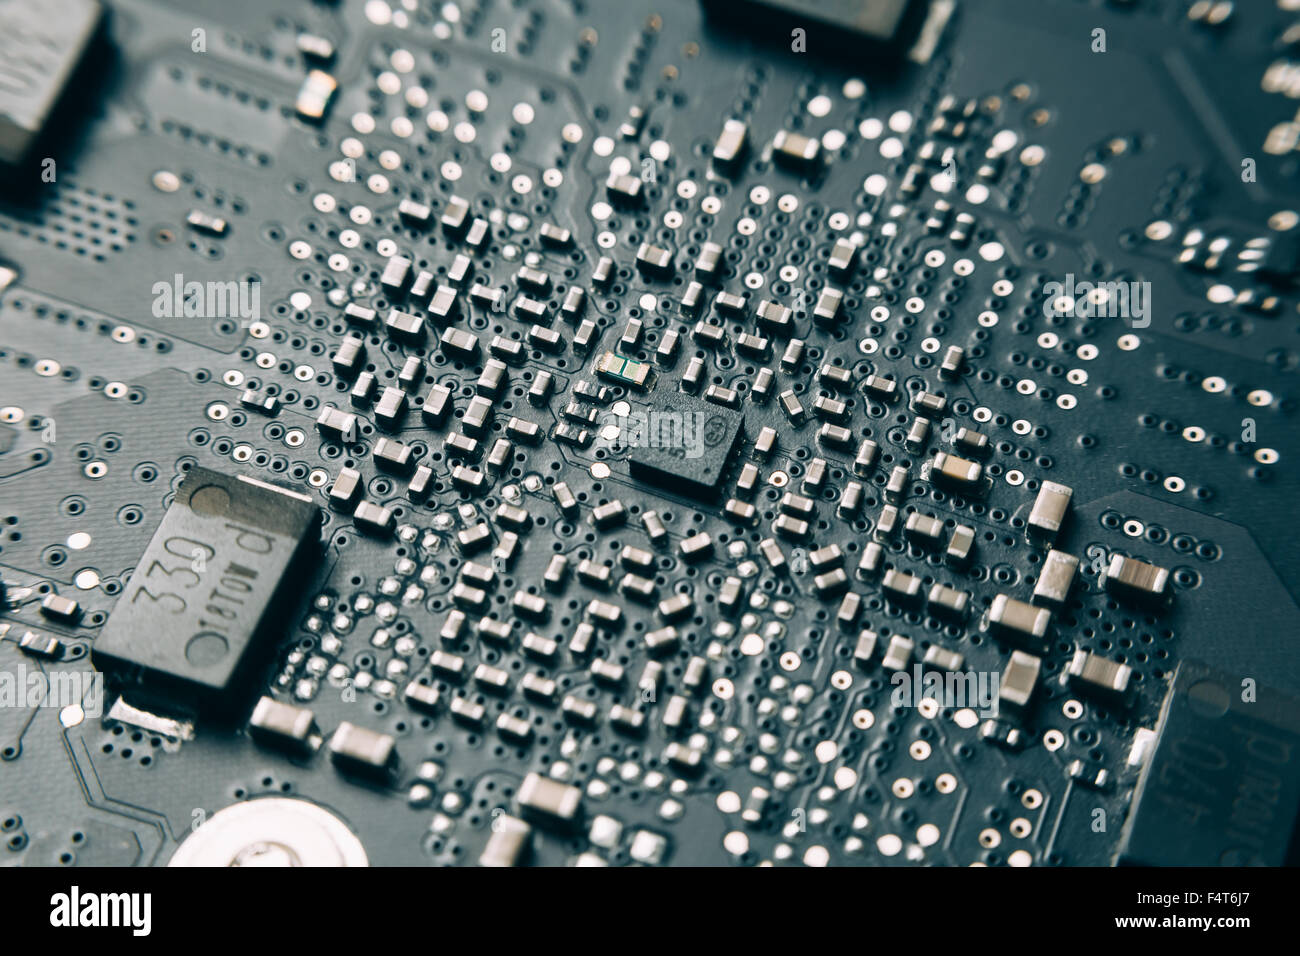 Printed Circuit Board with electrical components. Stock Photo